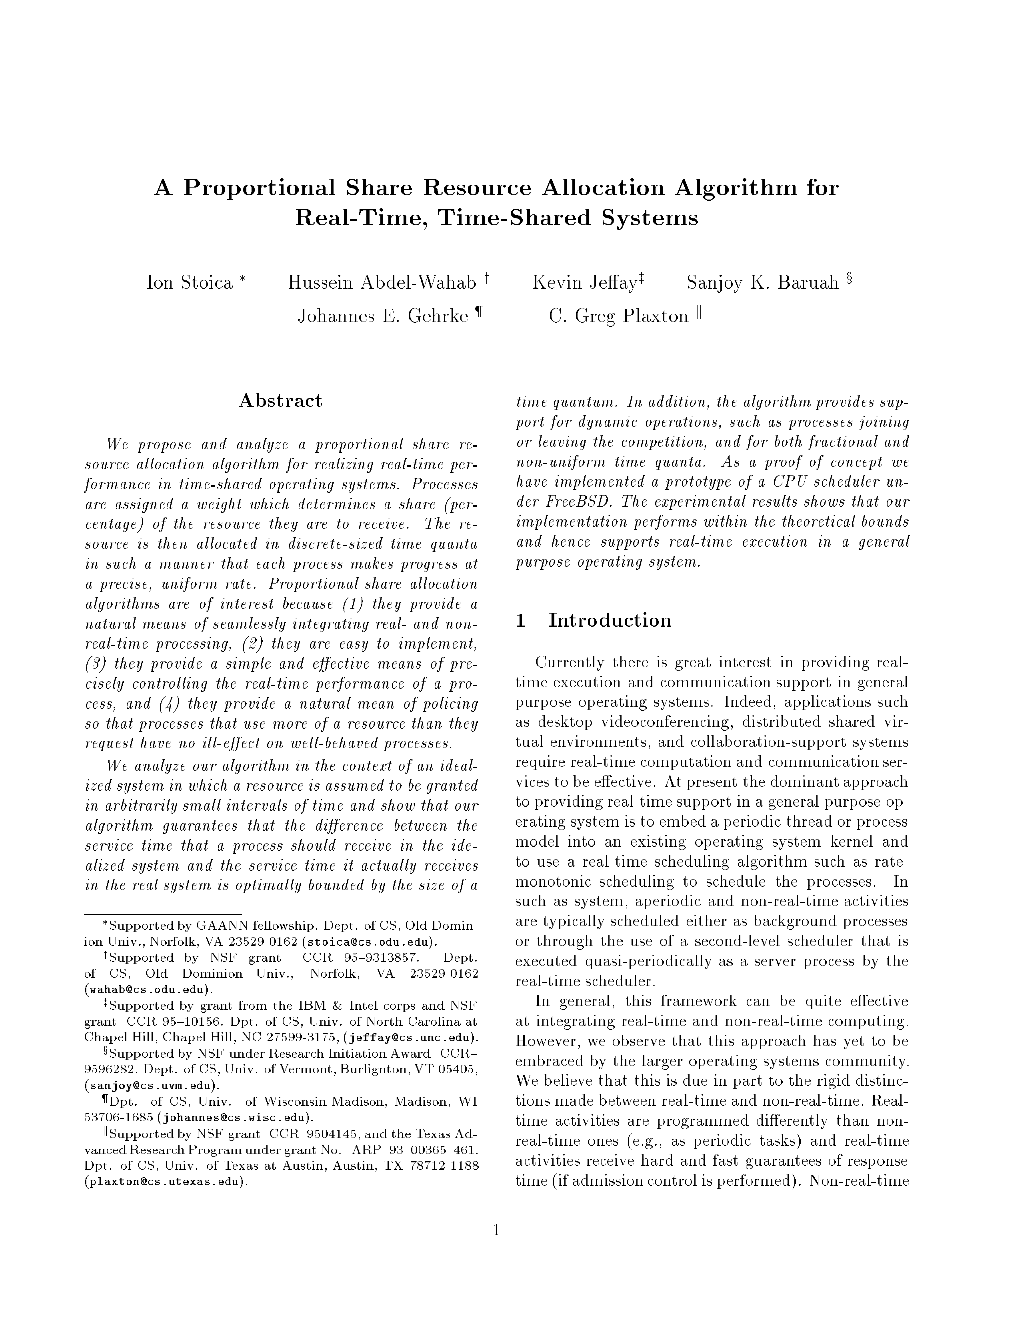 A Proportional Share Resource Allocation Algorithm for Real-Time